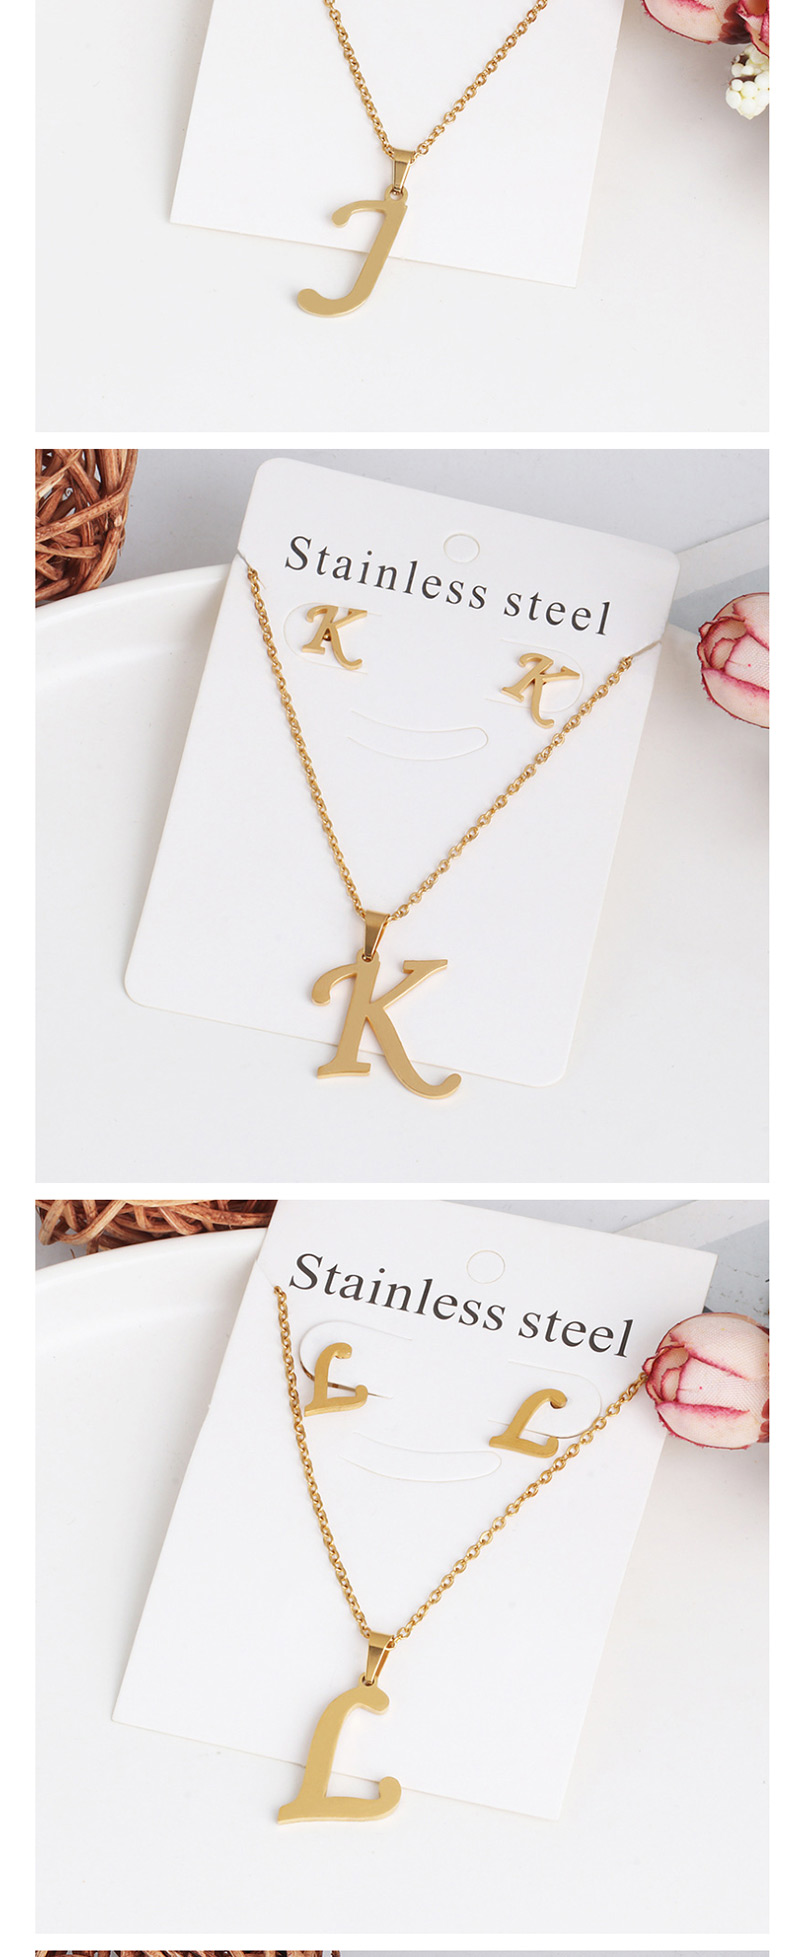 Fashion C Gold Stainless Steel Letter Necklace Earrings Two-piece,Jewelry Sets